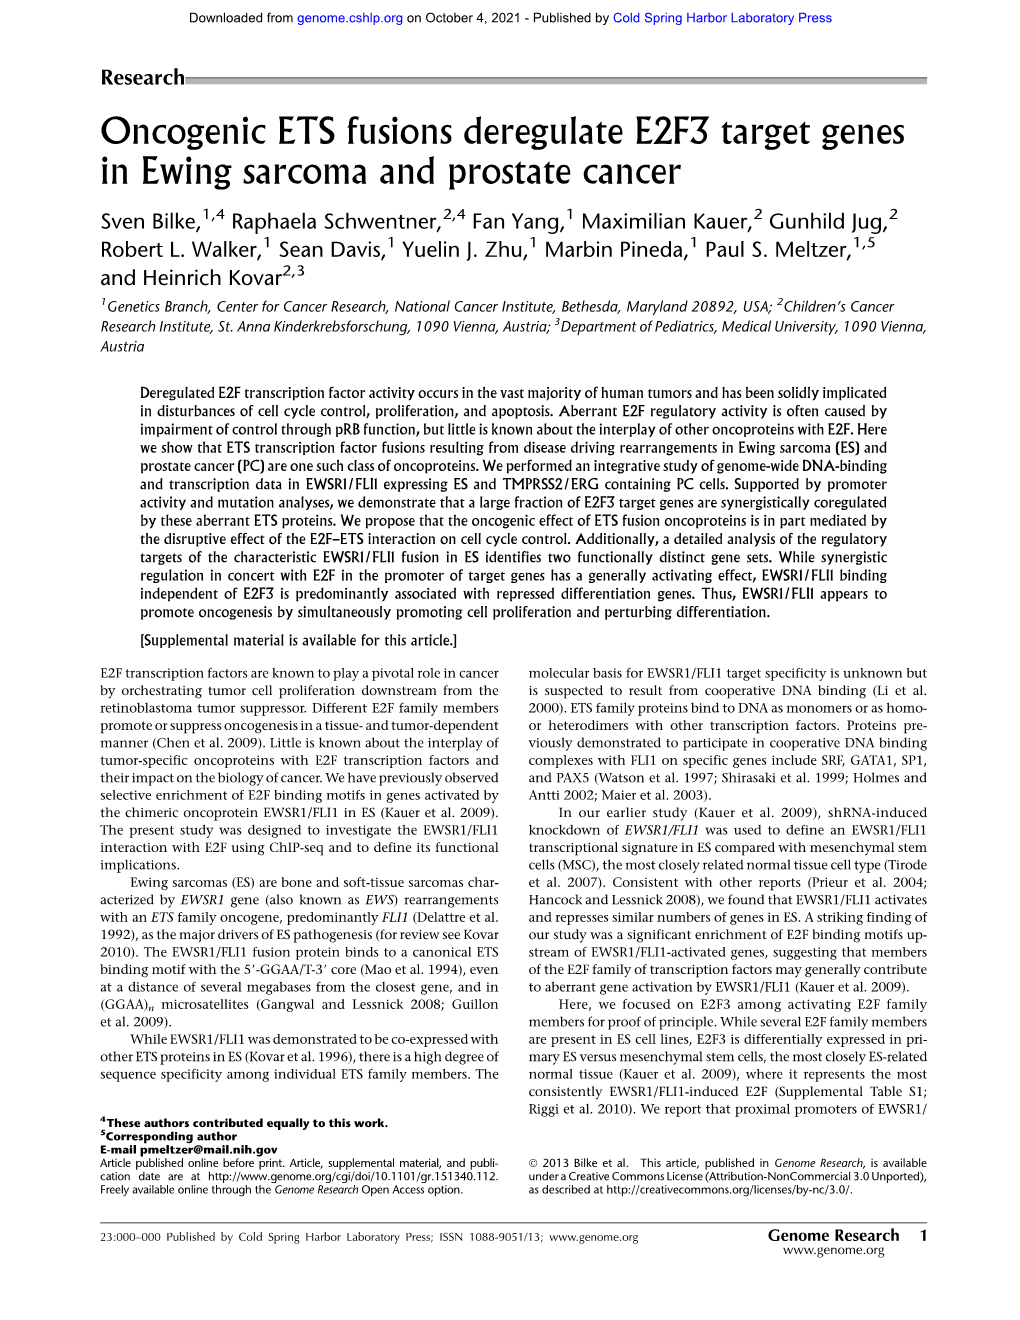 Oncogenic ETS Fusions Deregulate E2F3 Target Genes in Ewing Sarcoma and Prostate Cancer